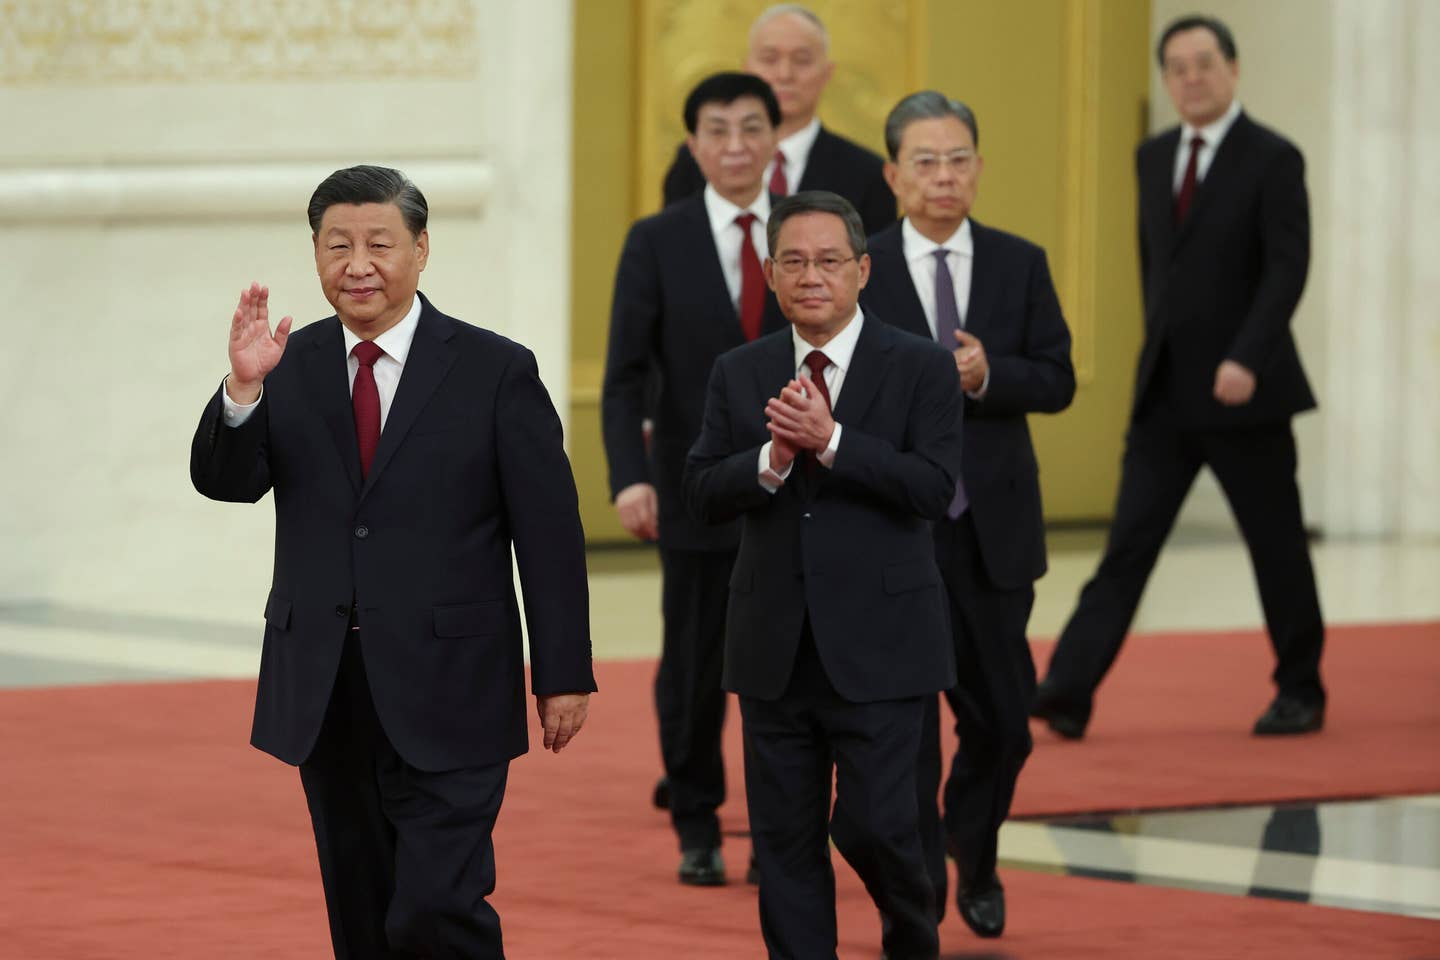 Xi Jinping (left), attends a meeting during the Communist Party Congress on October 23, 2022, in Beijing. <em>Photo by Lintao Zhang/Getty Images</em>